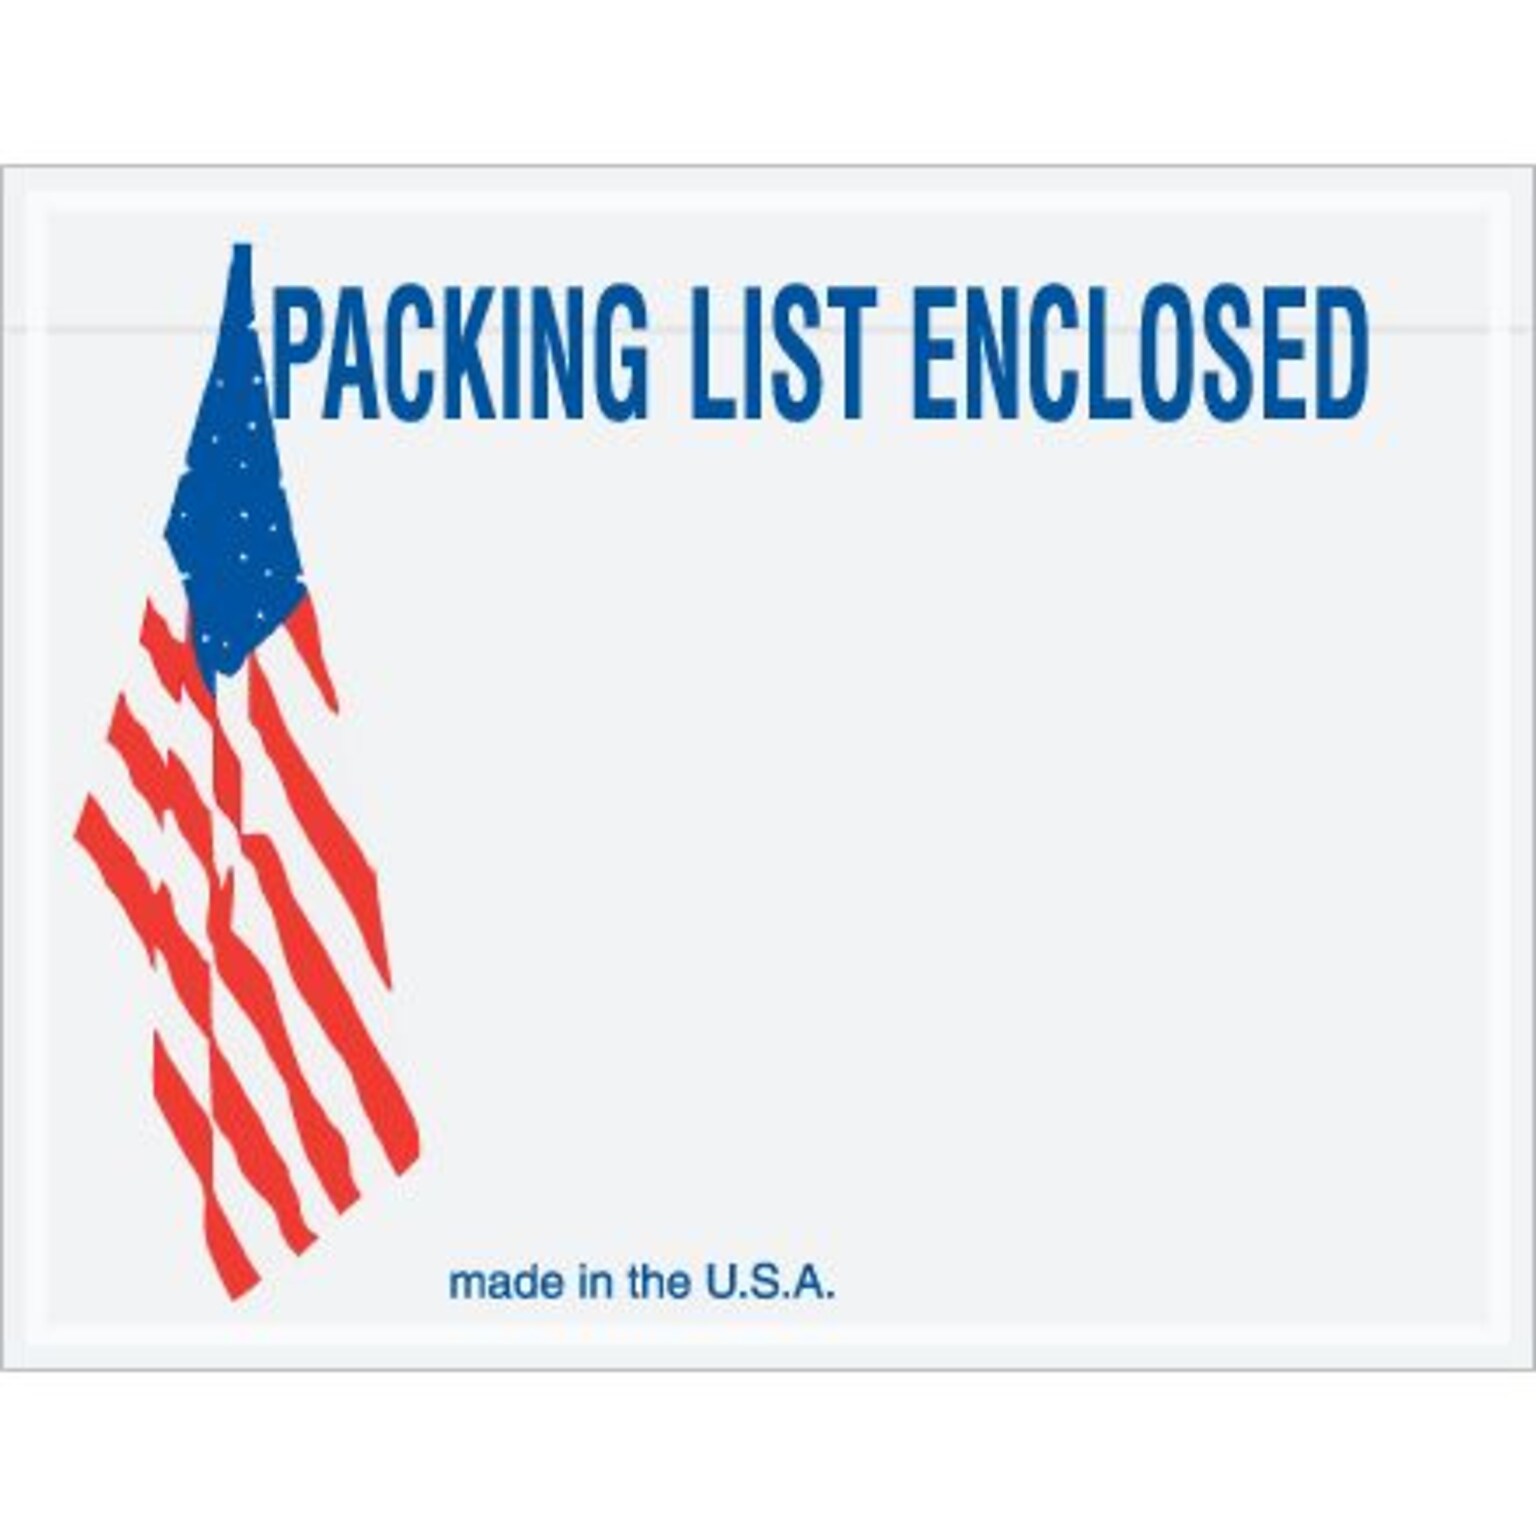 Quill Brand Packing List Envelope, 7 x 5 1/2 - U.S.A. Flag Panel Face, Packing List Enclosed, 1000/Case